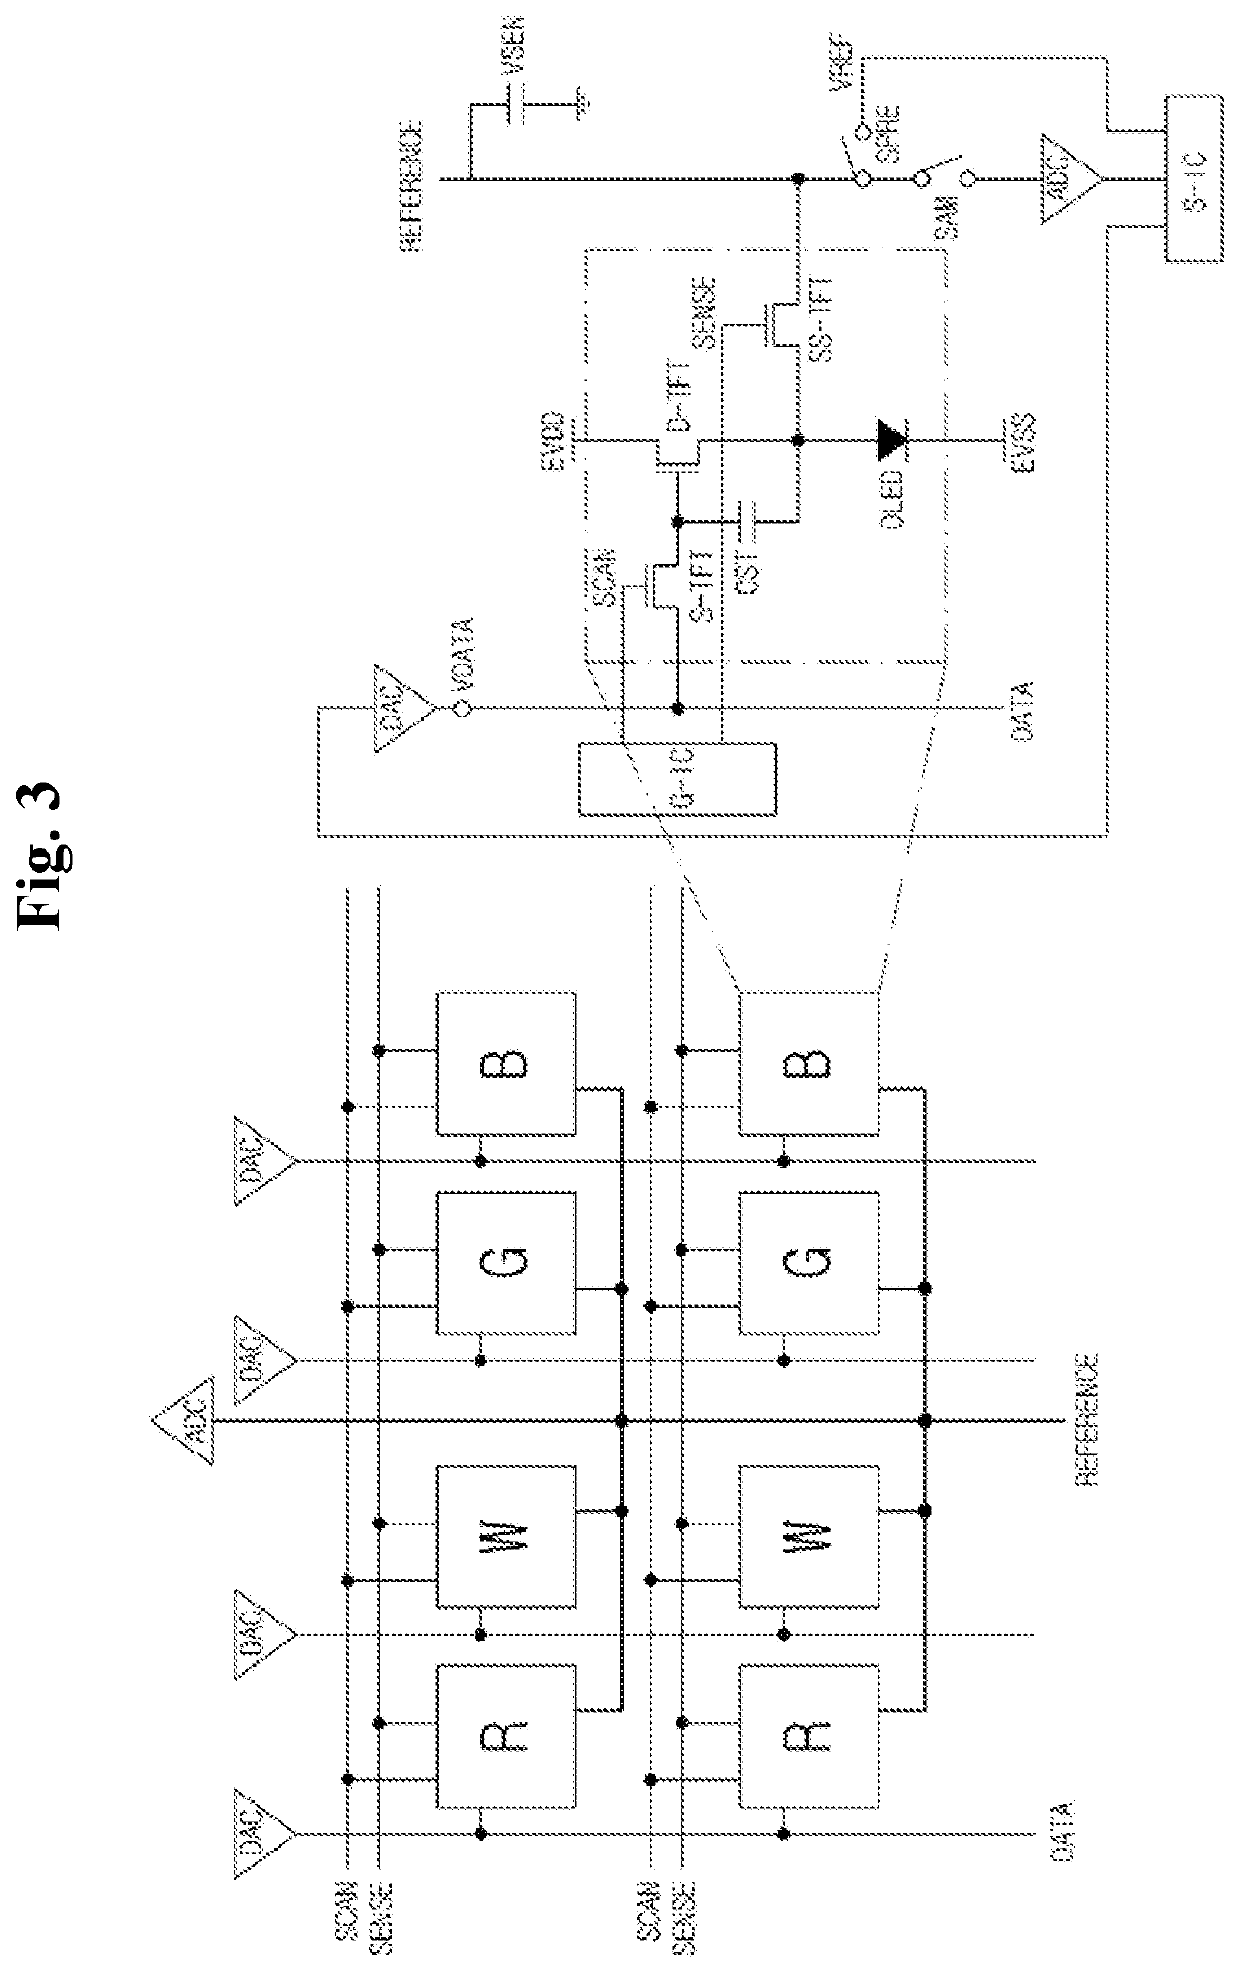 Display device and compensation method